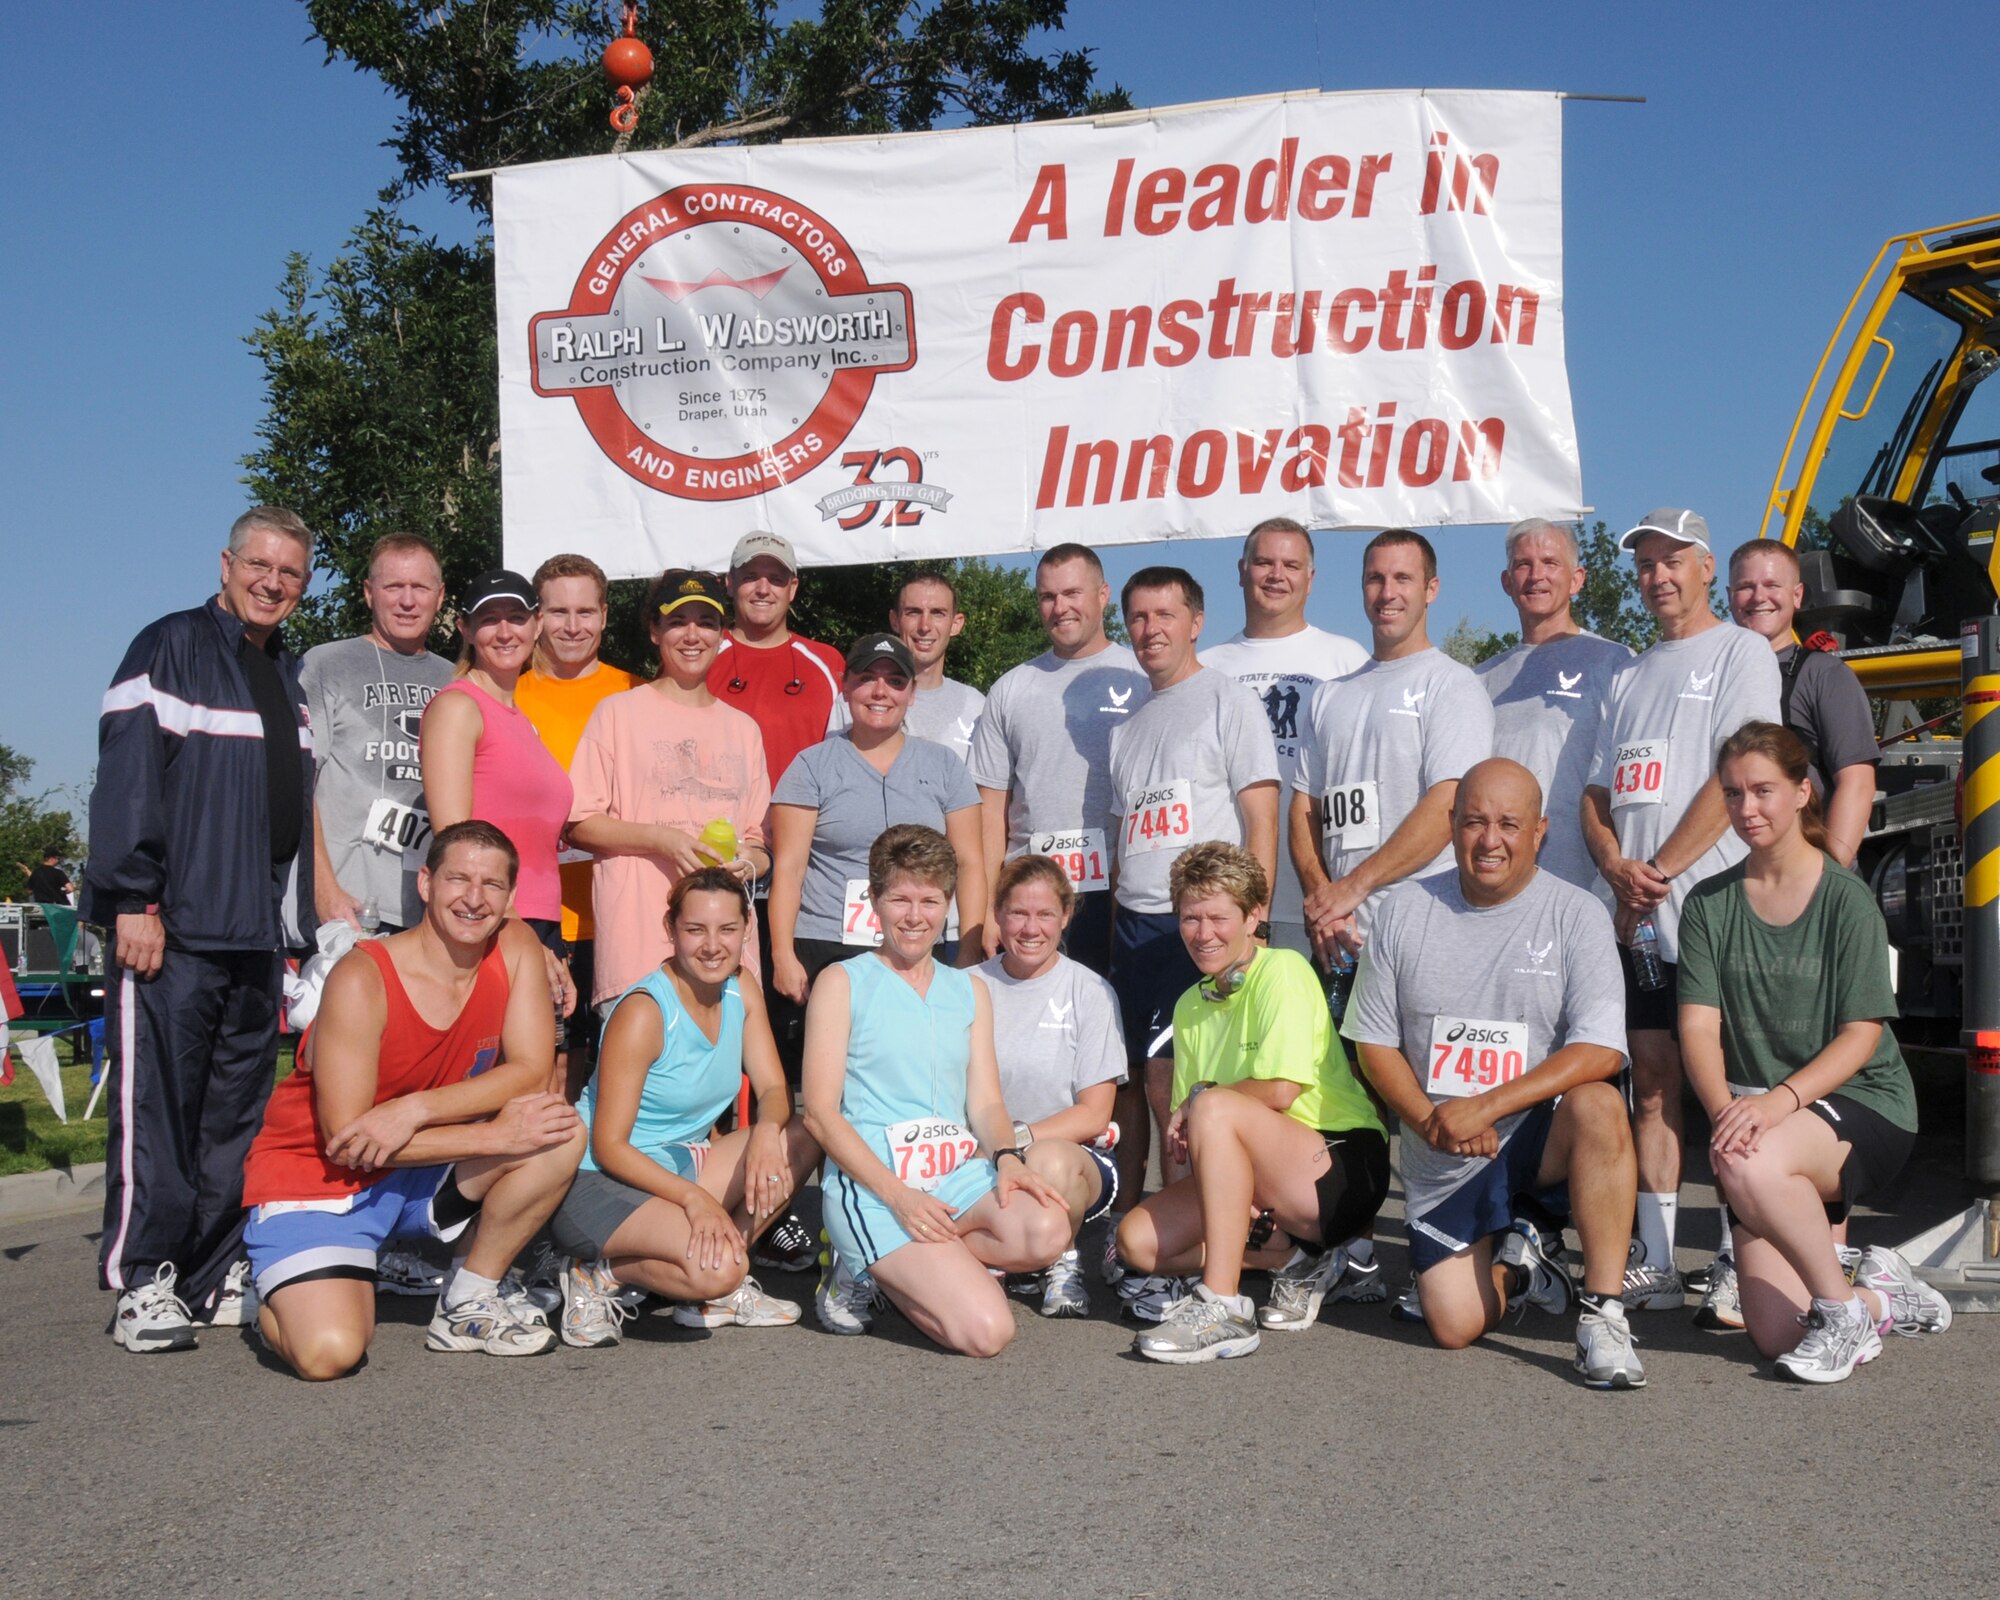 DRAPER, Utah - Members of the 151st Utah Air National Guard competed in 2008 Minuteman 5K run/walk on Aug. 2.  The run, sponsored of Ralph L. Wadsworth Construction Company, supports Utah guard families and deployed members. (Released) U.S. Air Force photo by: Tech. Sgt. Michael D Evans
